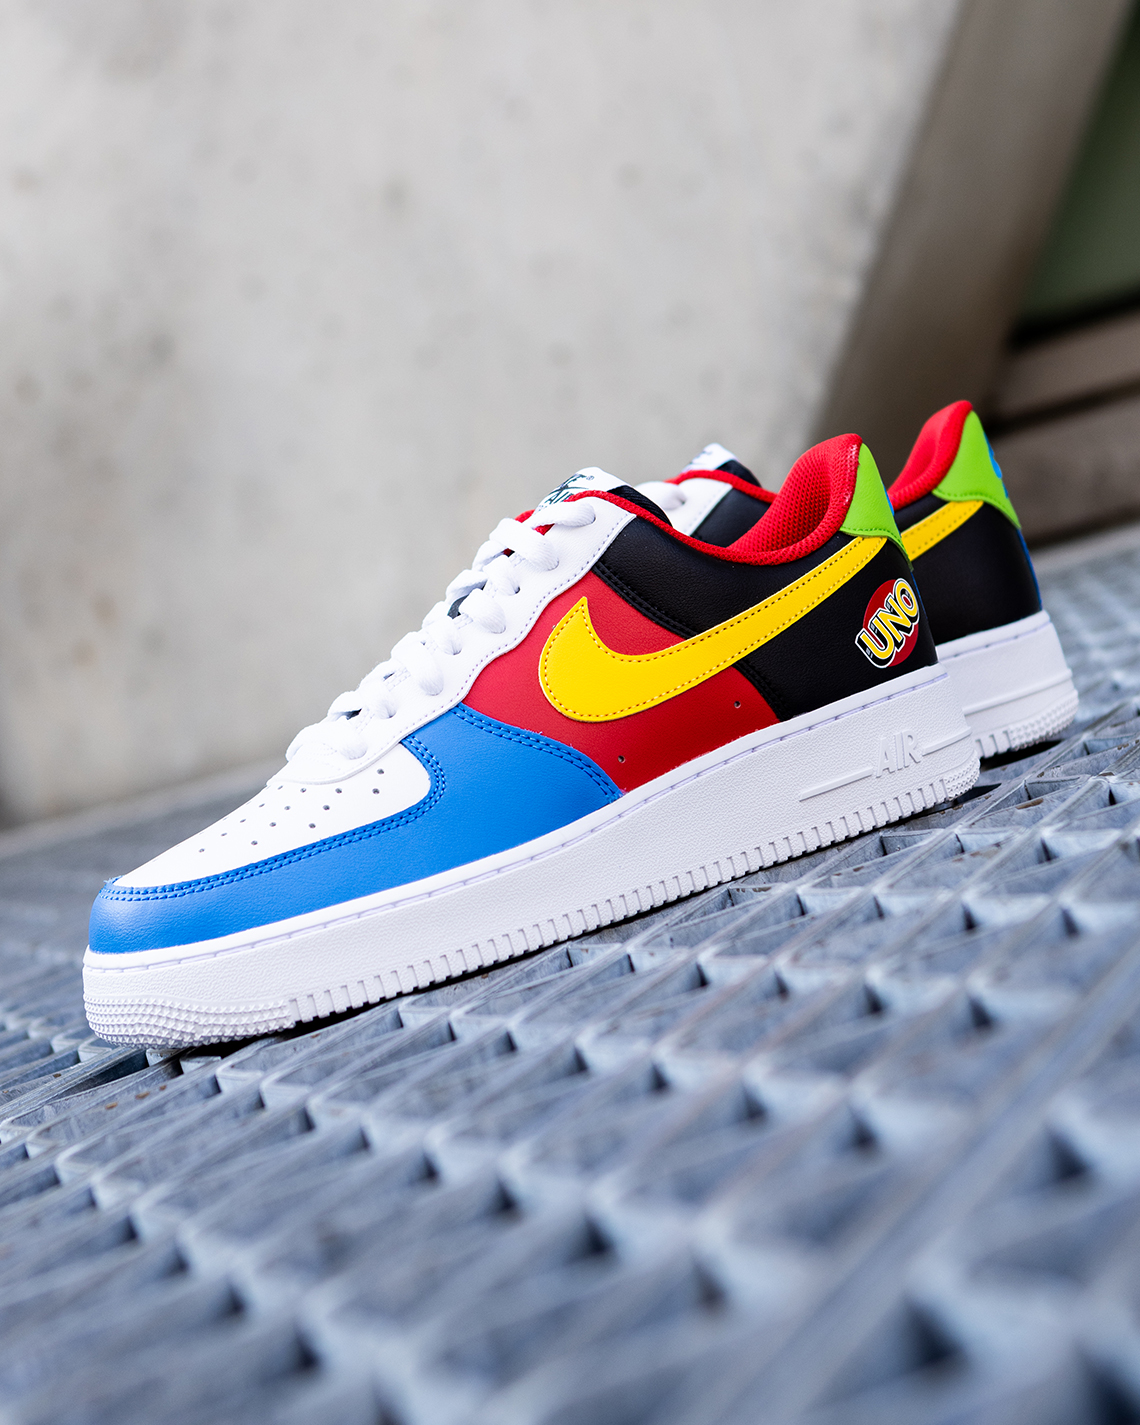 Nike Air Force 1 40th Anniversary Releases 2022 | SneakerNews.com